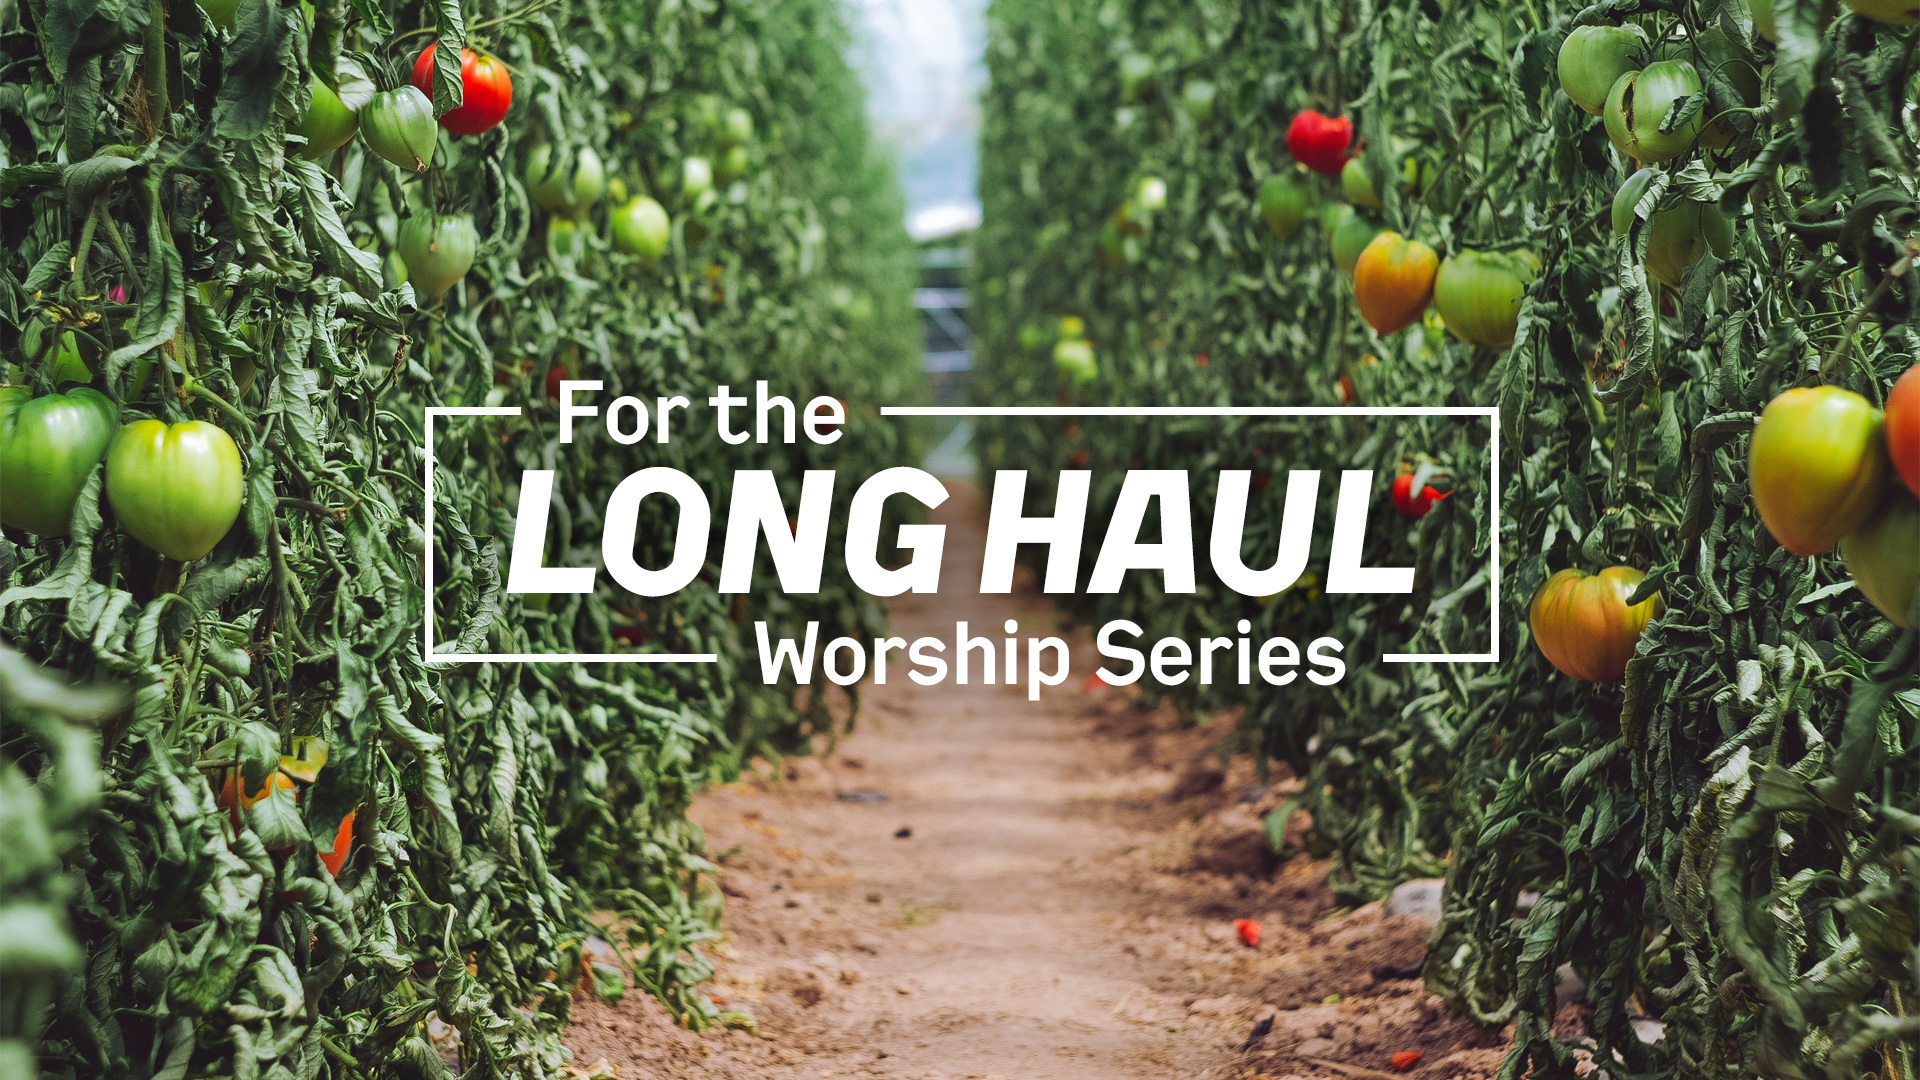 For the Long Haul Worship Series